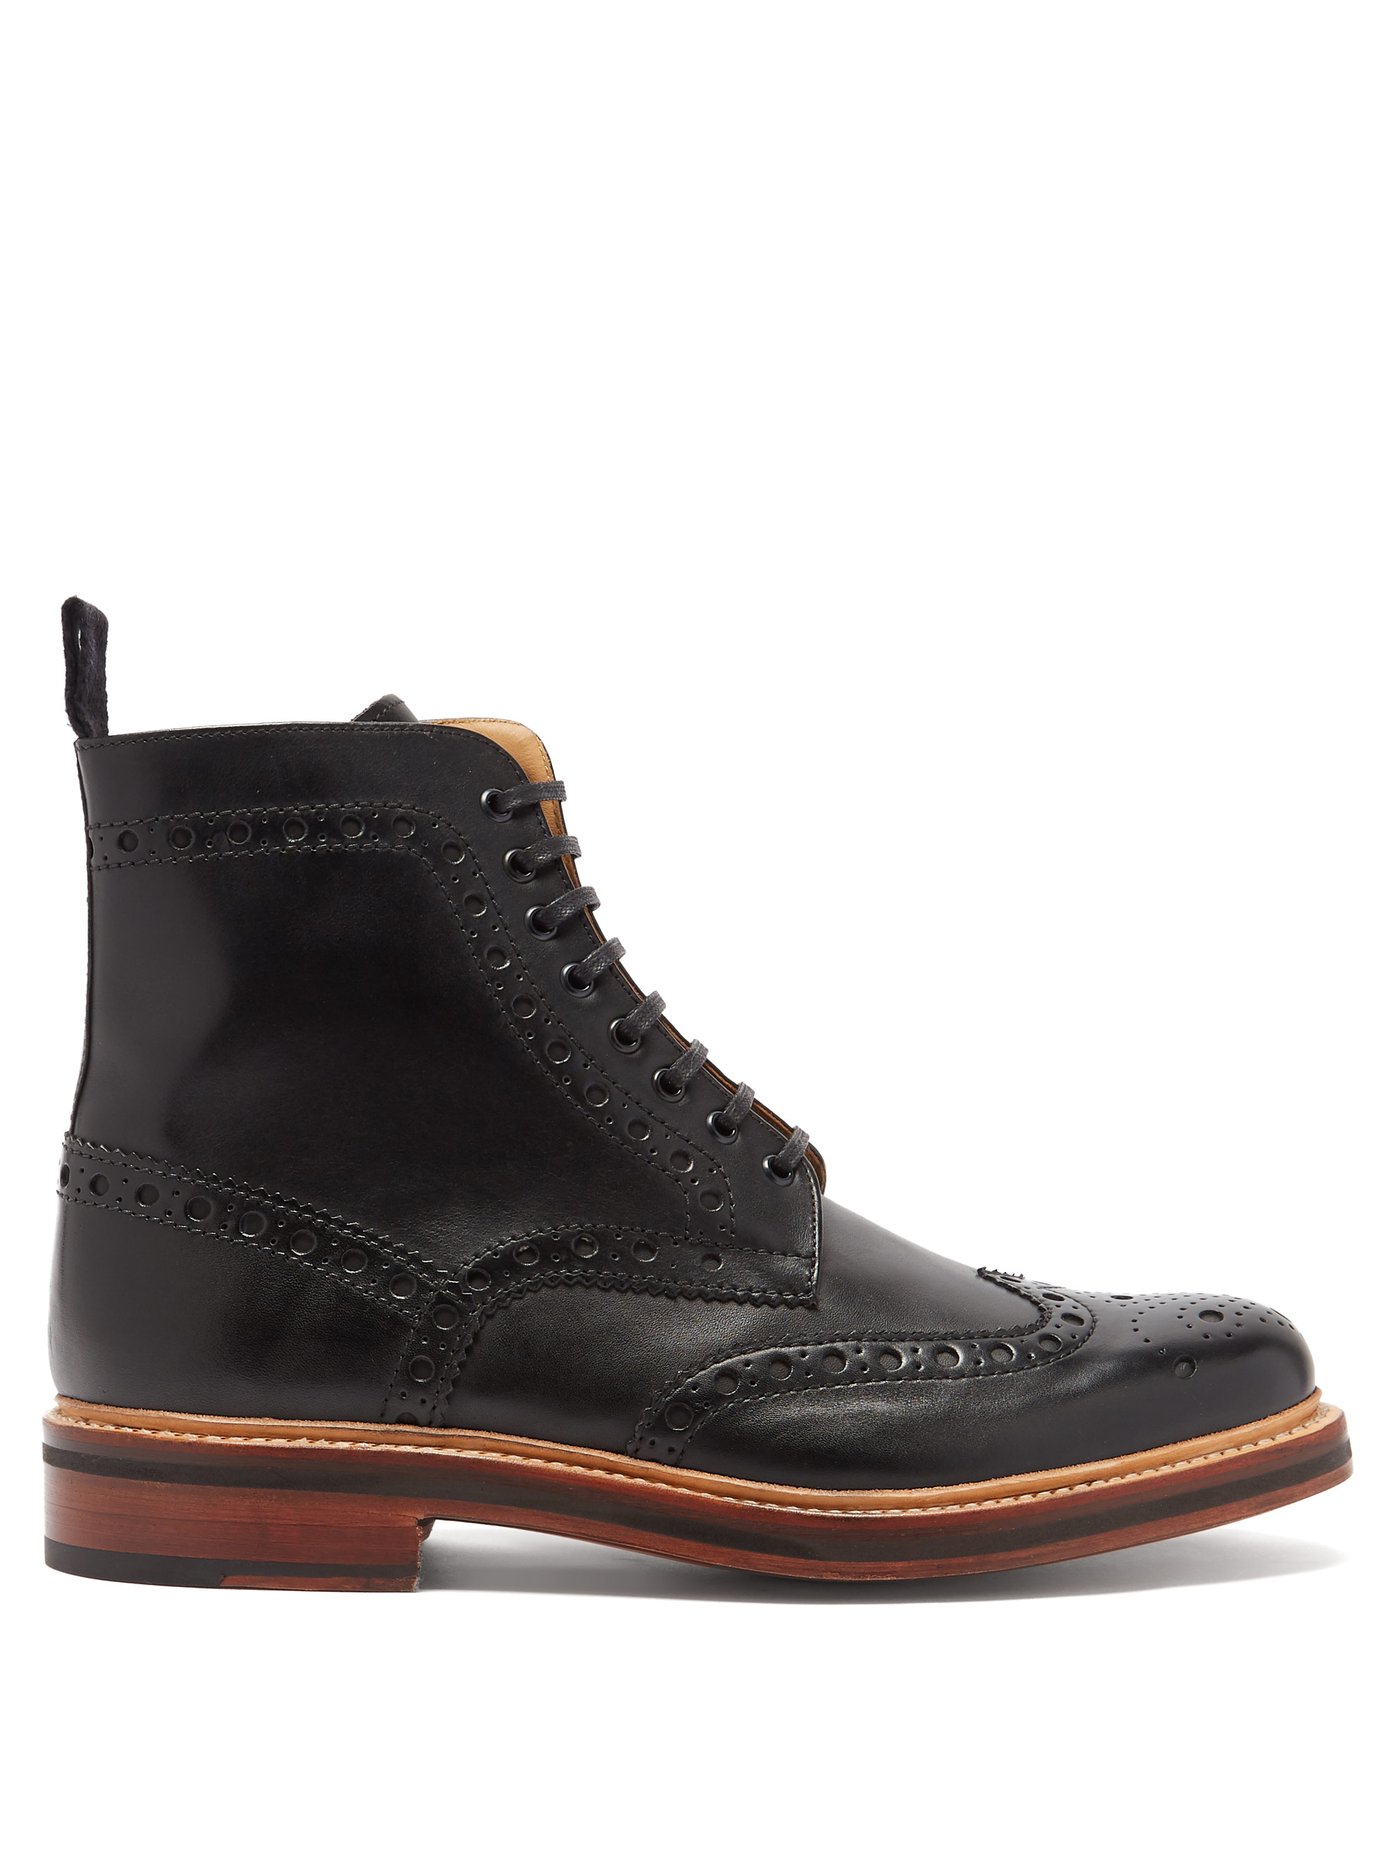 Fred leather brogue boots | Grenson 